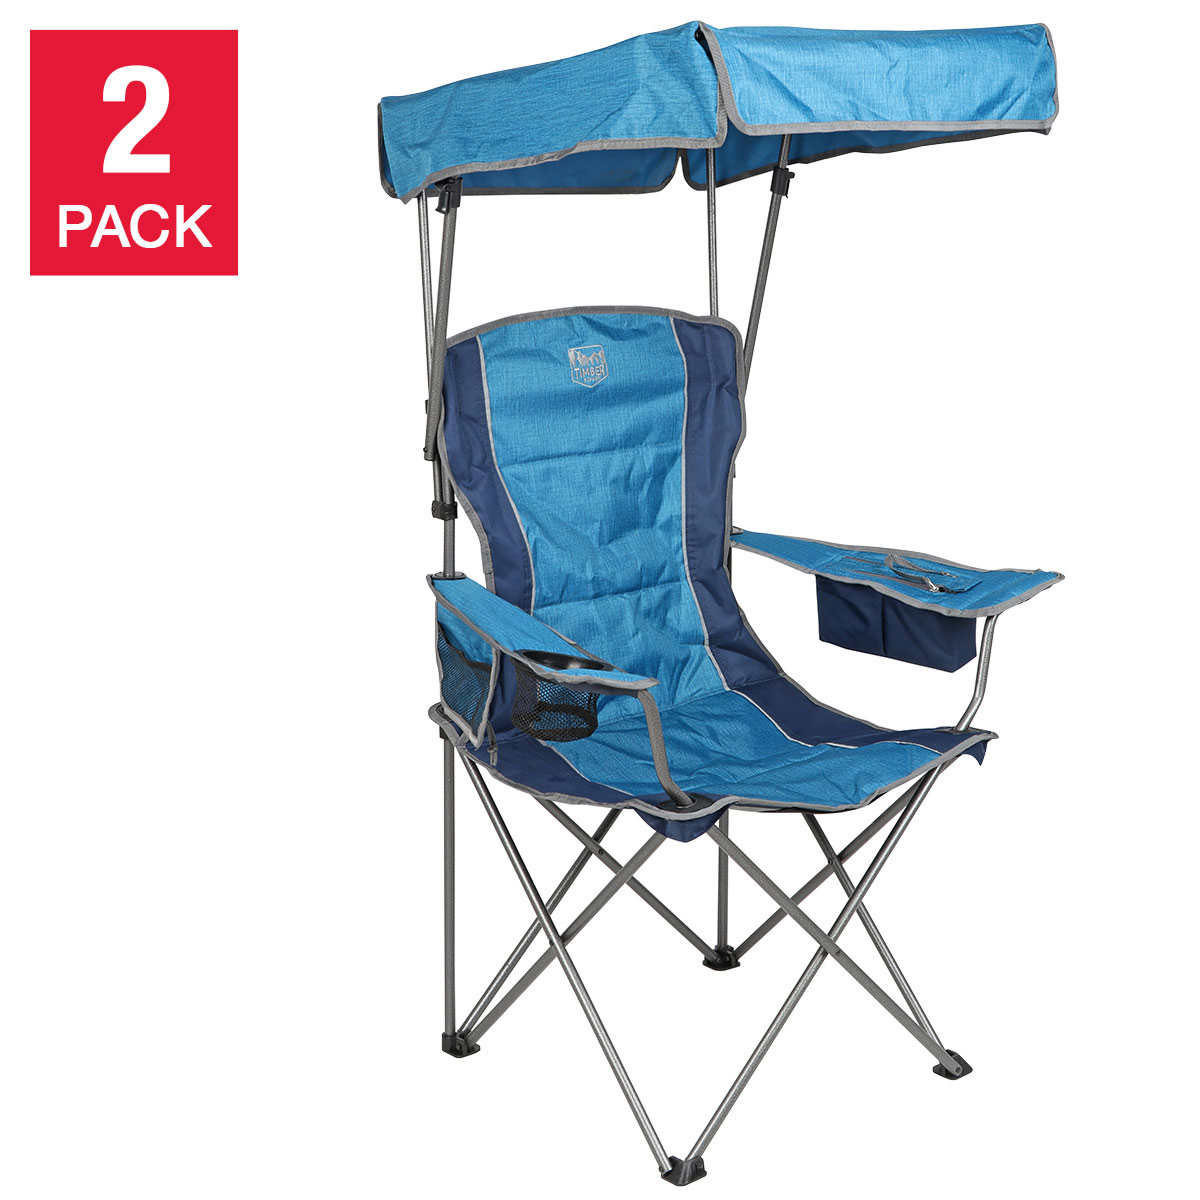 Timber Ridge Canopy Chair 2 Pack Costco